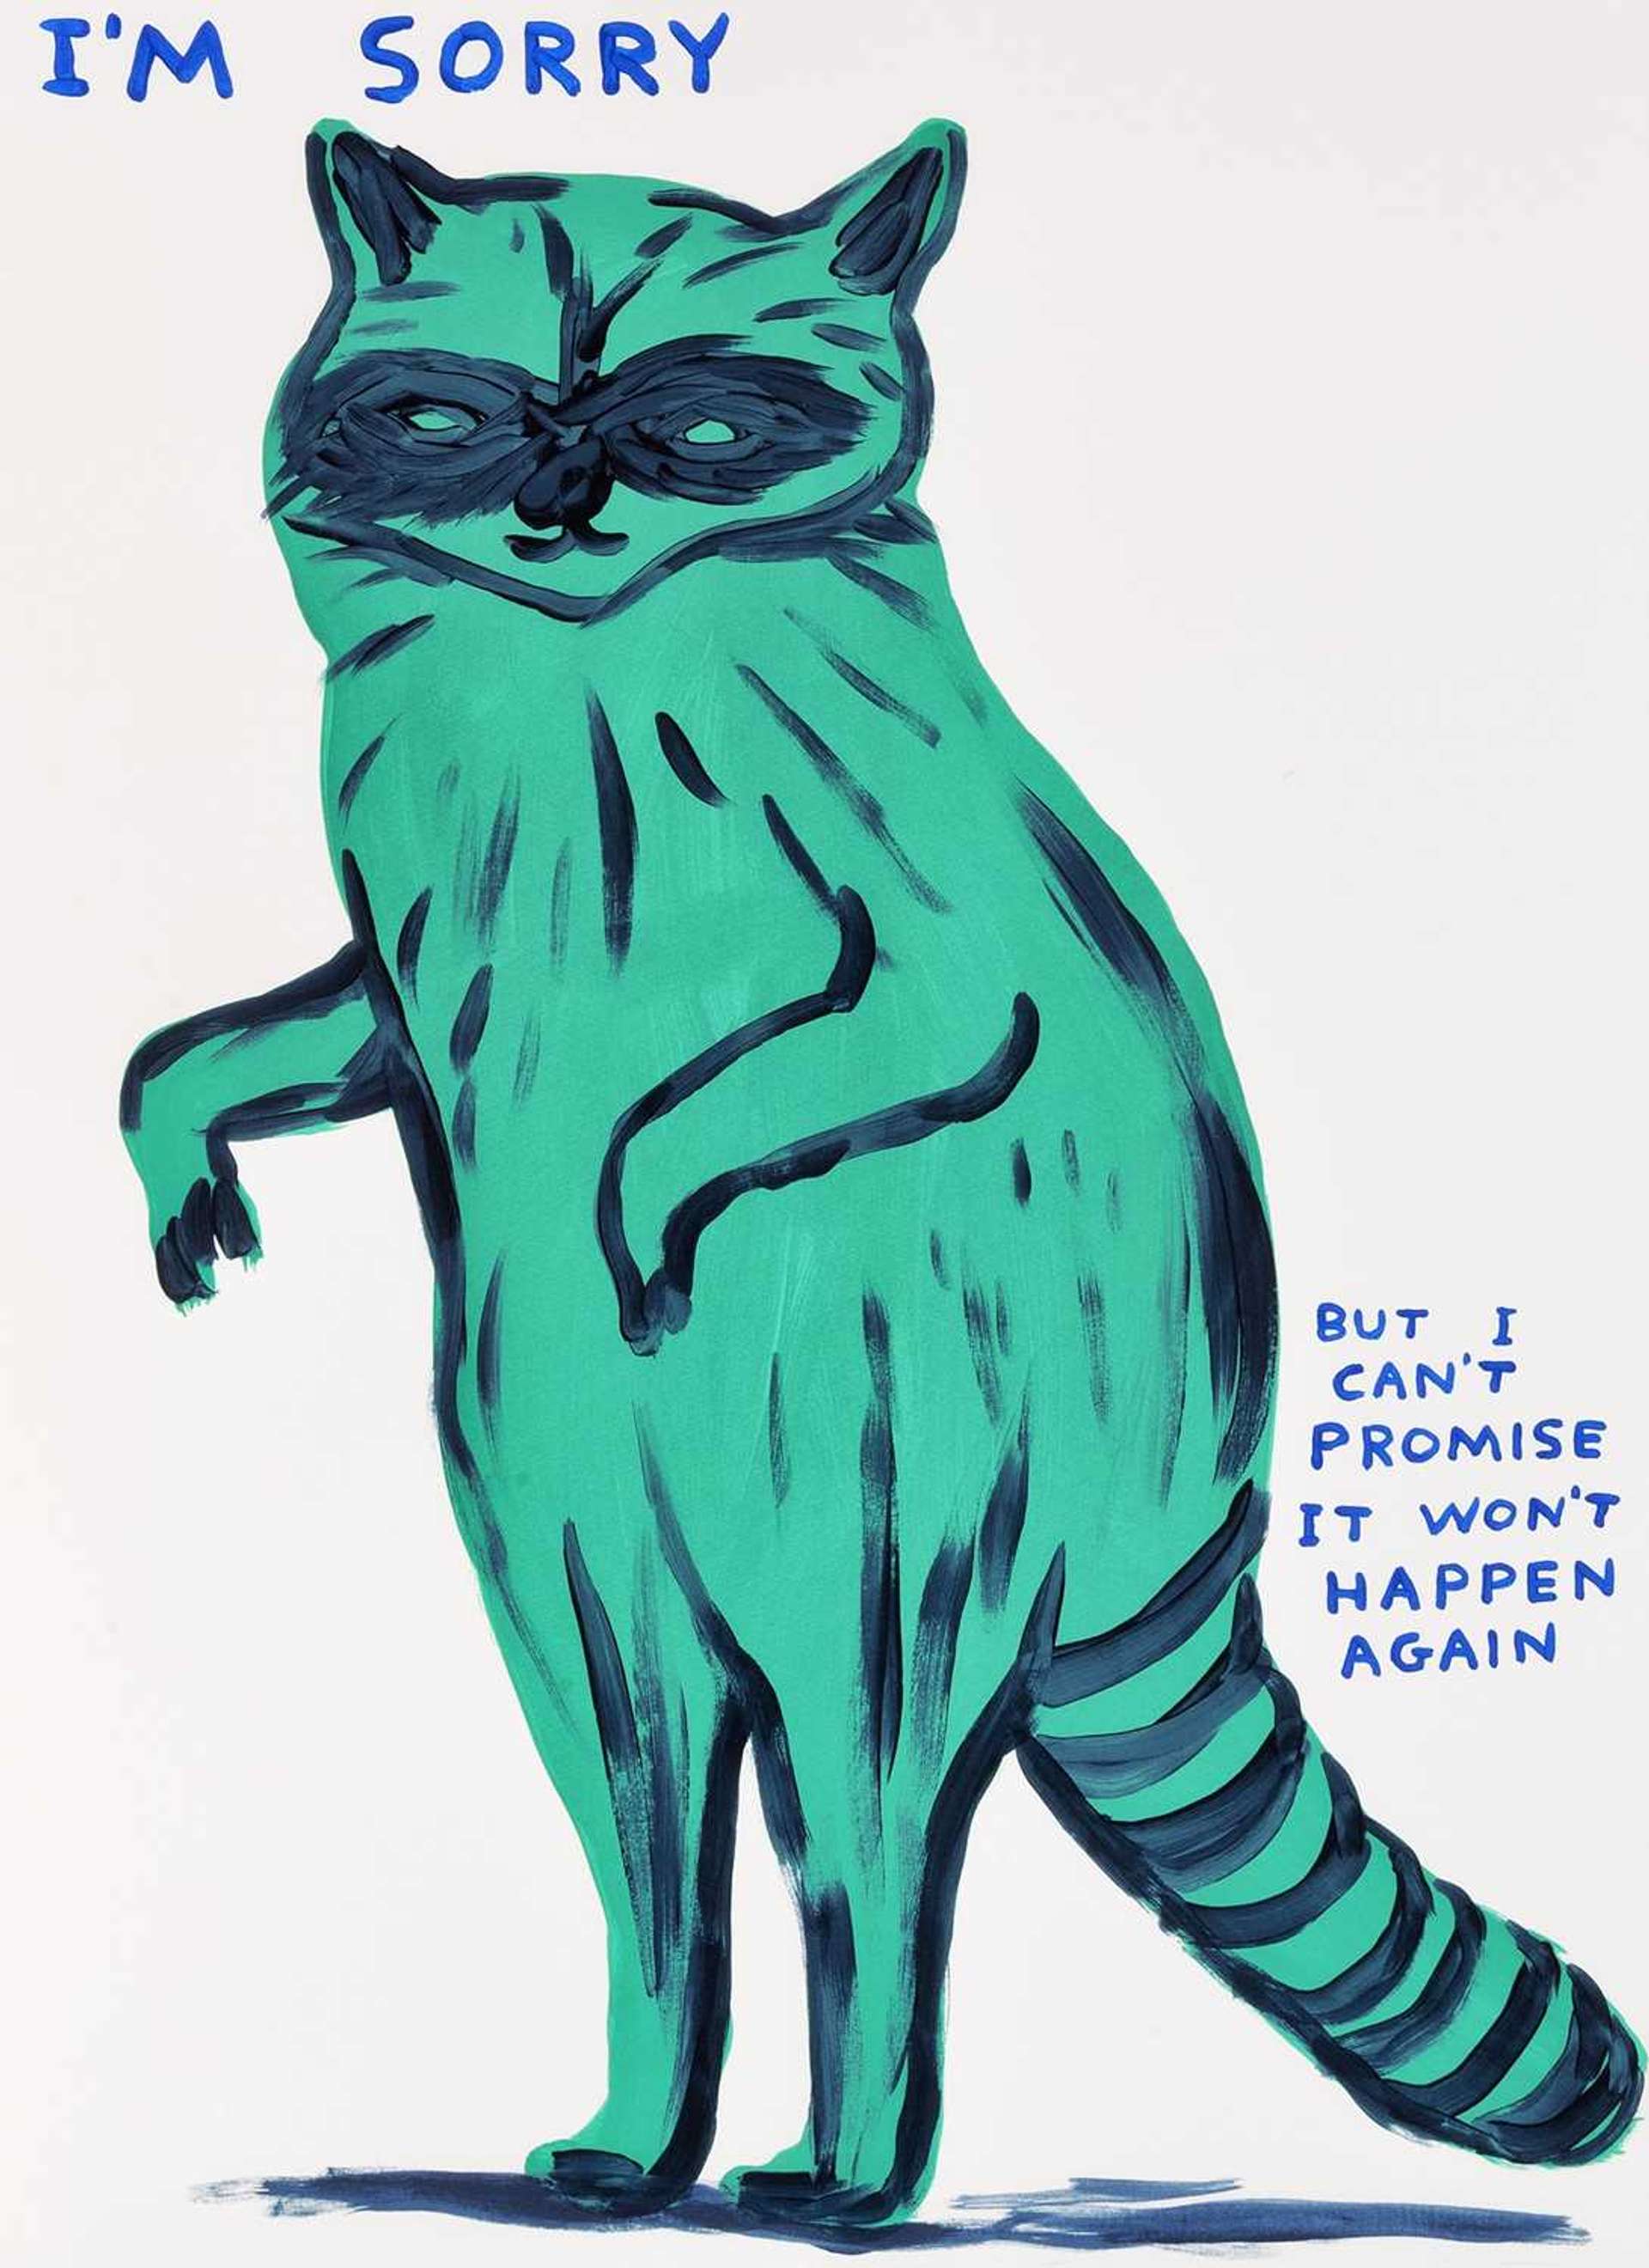 I'm Sorry But I Can't Promise It Won't Happen Again - Signed Print by David Shrigley 2021 - MyArtBroker